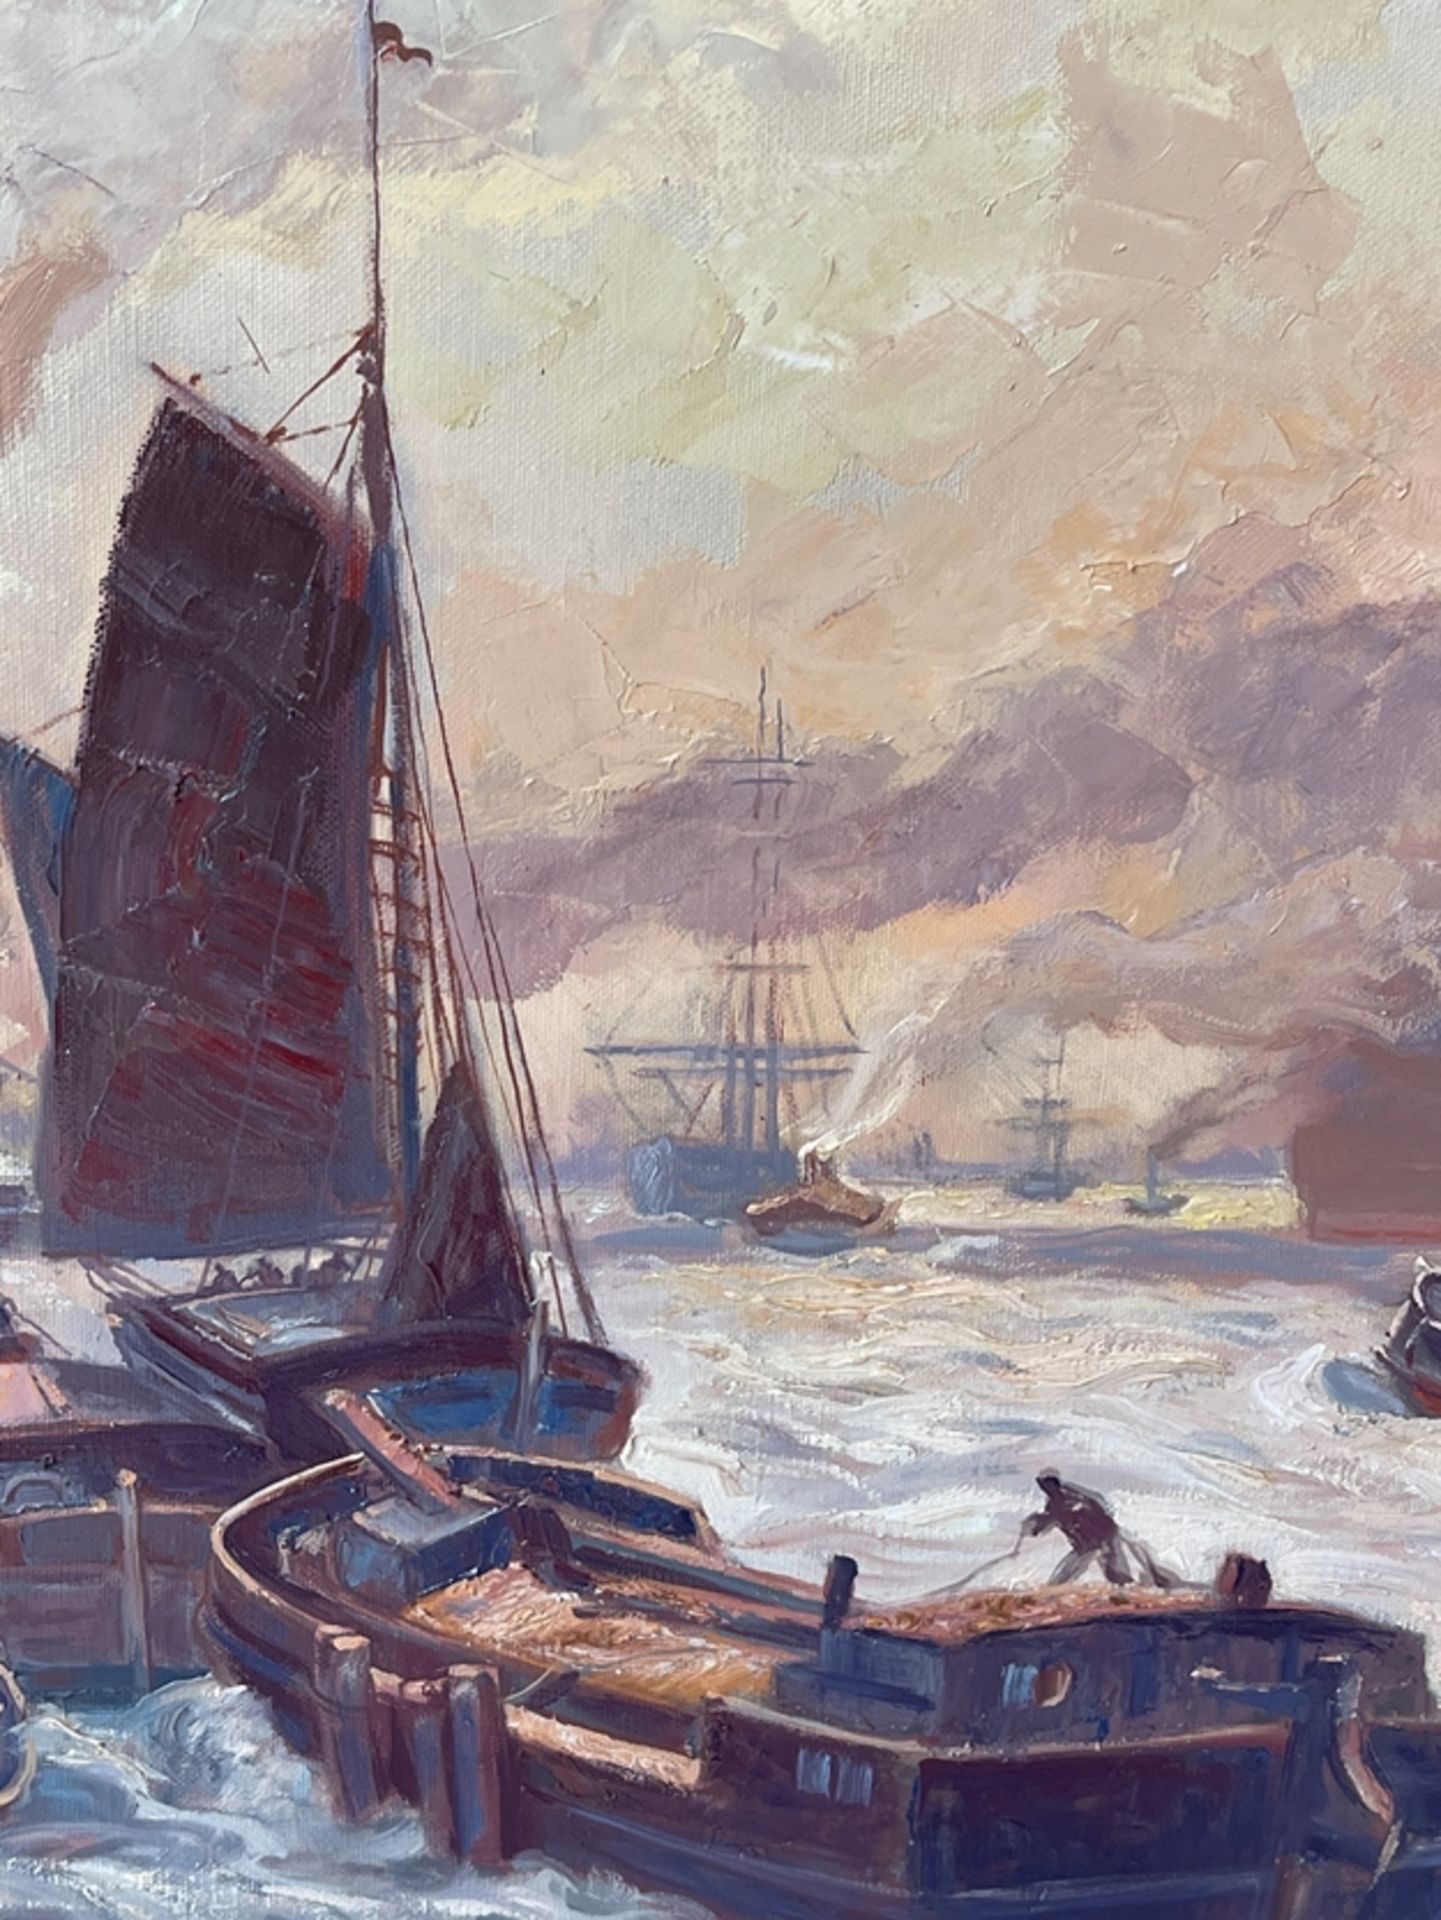 Painting harbor with ships - Image 4 of 5